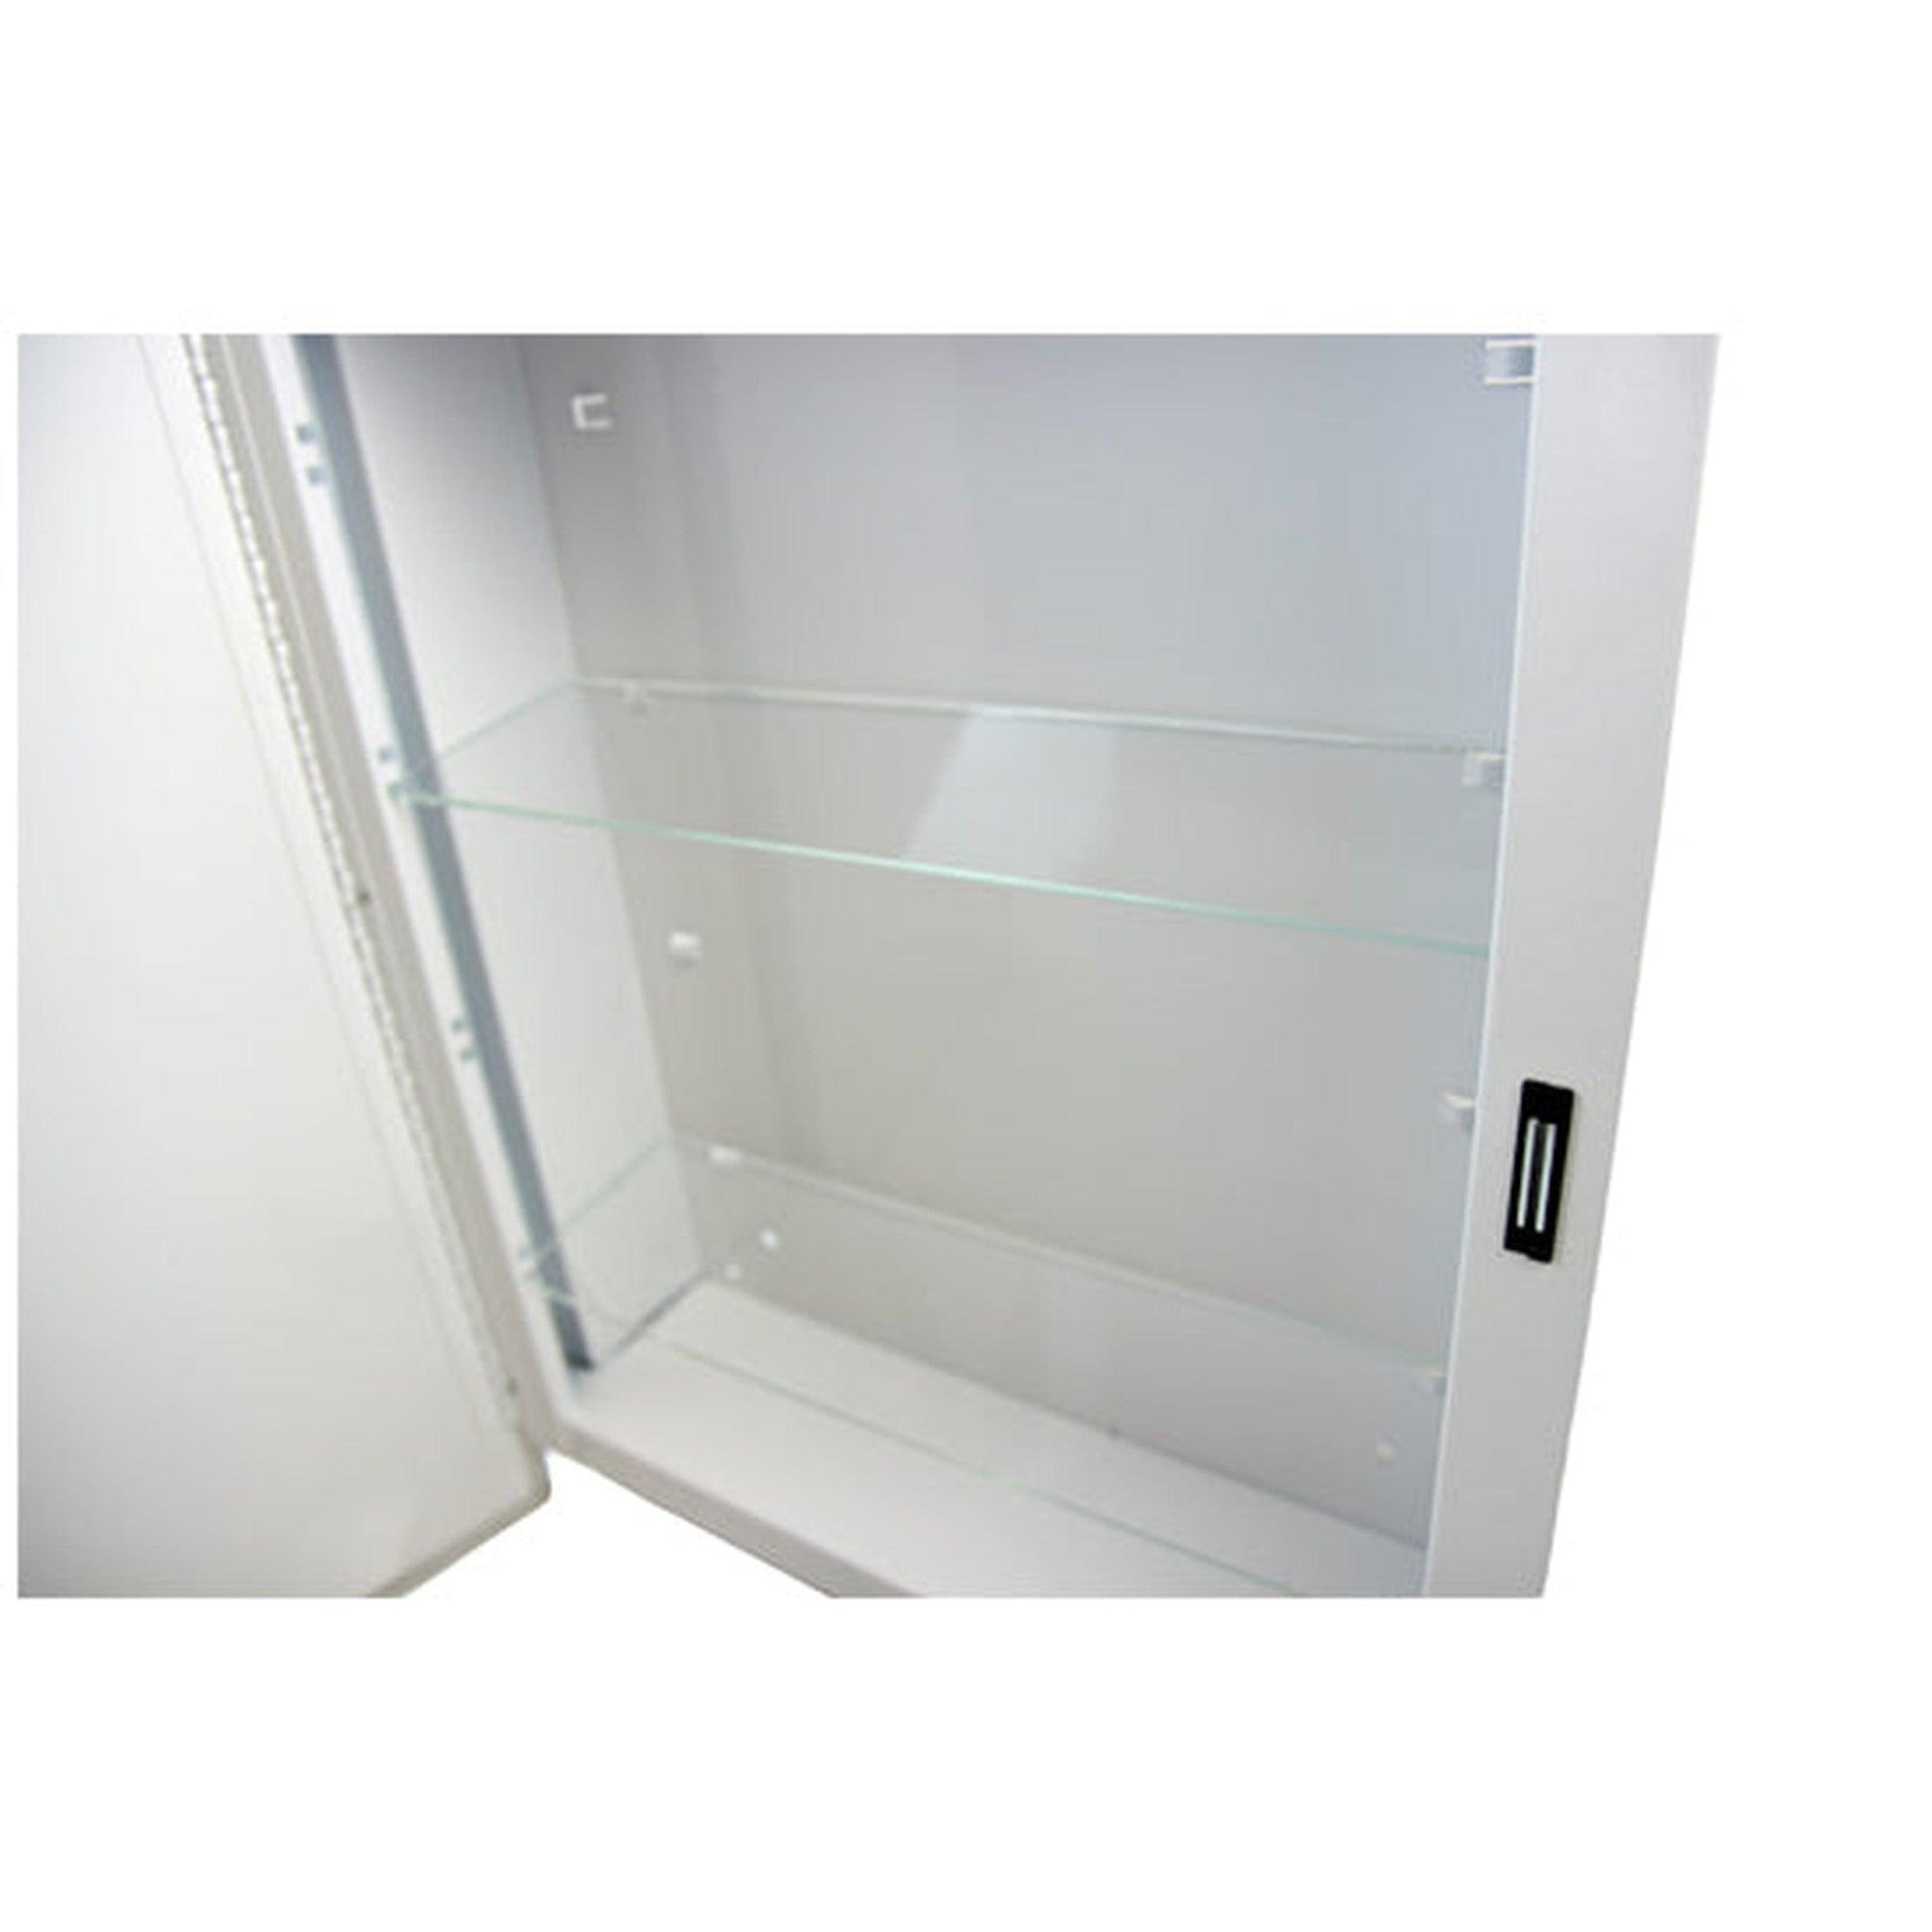 Frost 802W Wall Mounted White Medicine Cabinet